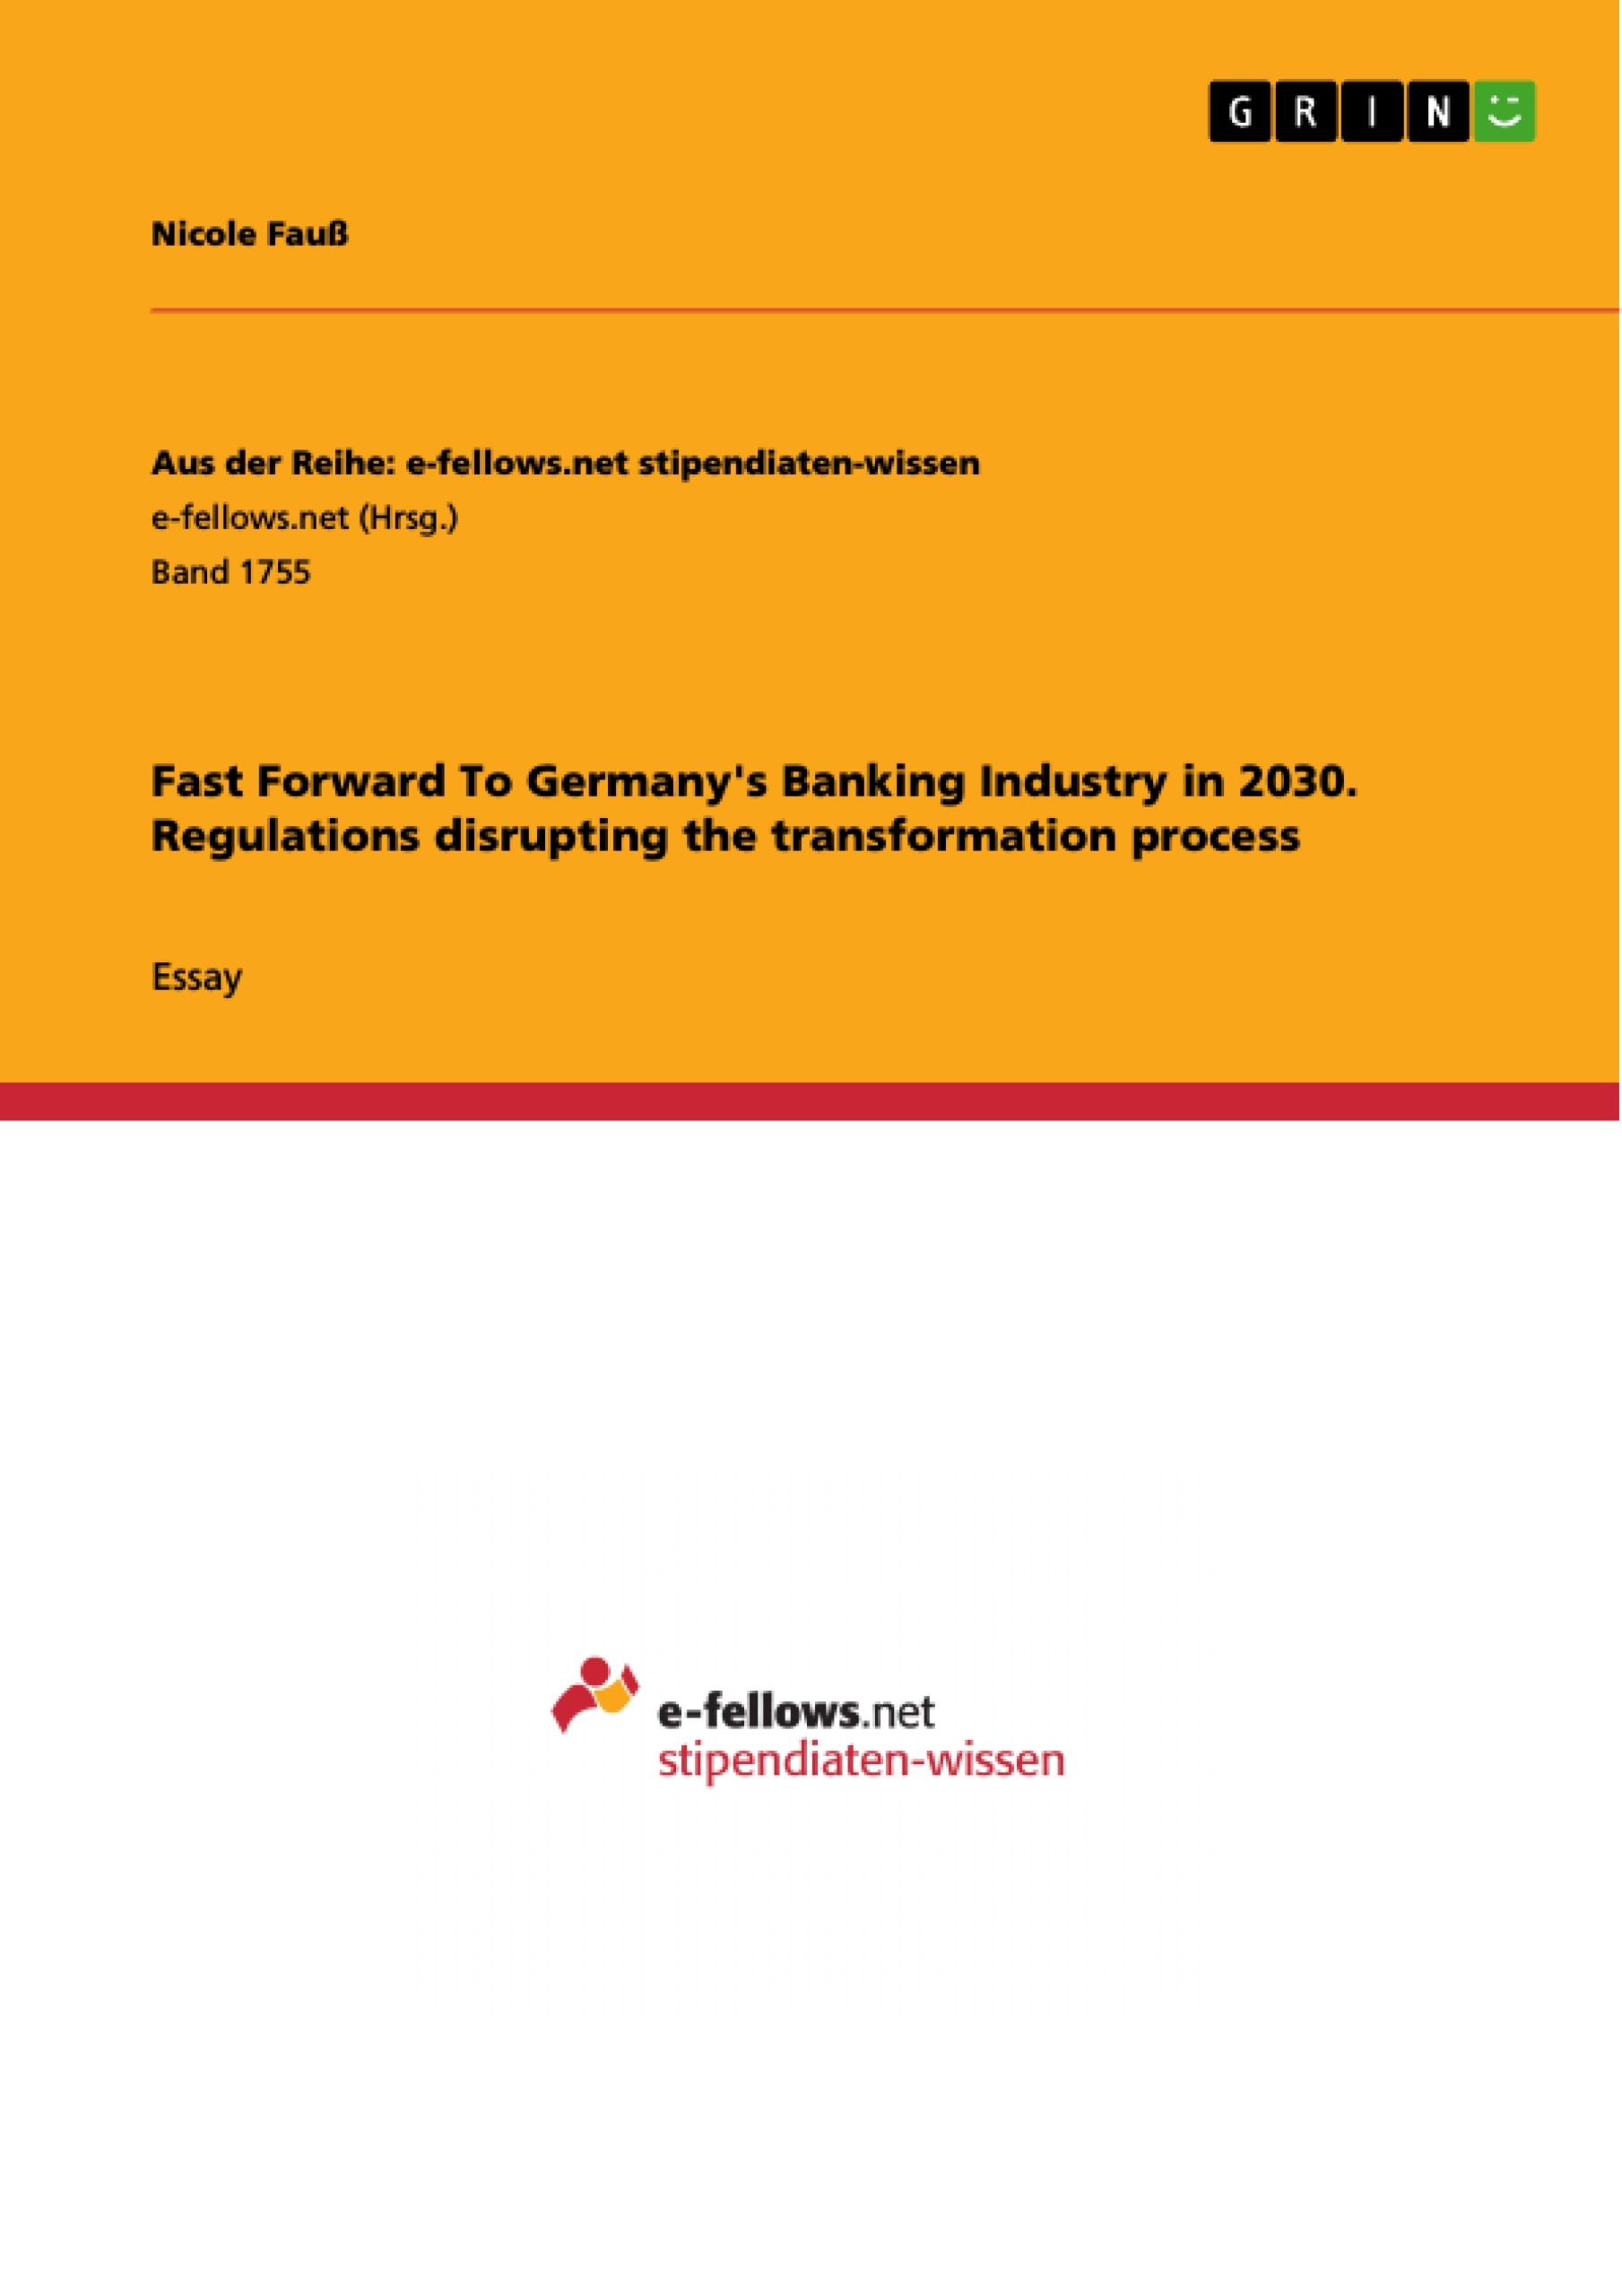 Título: Fast Forward To Germany's Banking Industry in 2030. Regulations disrupting the transformation process